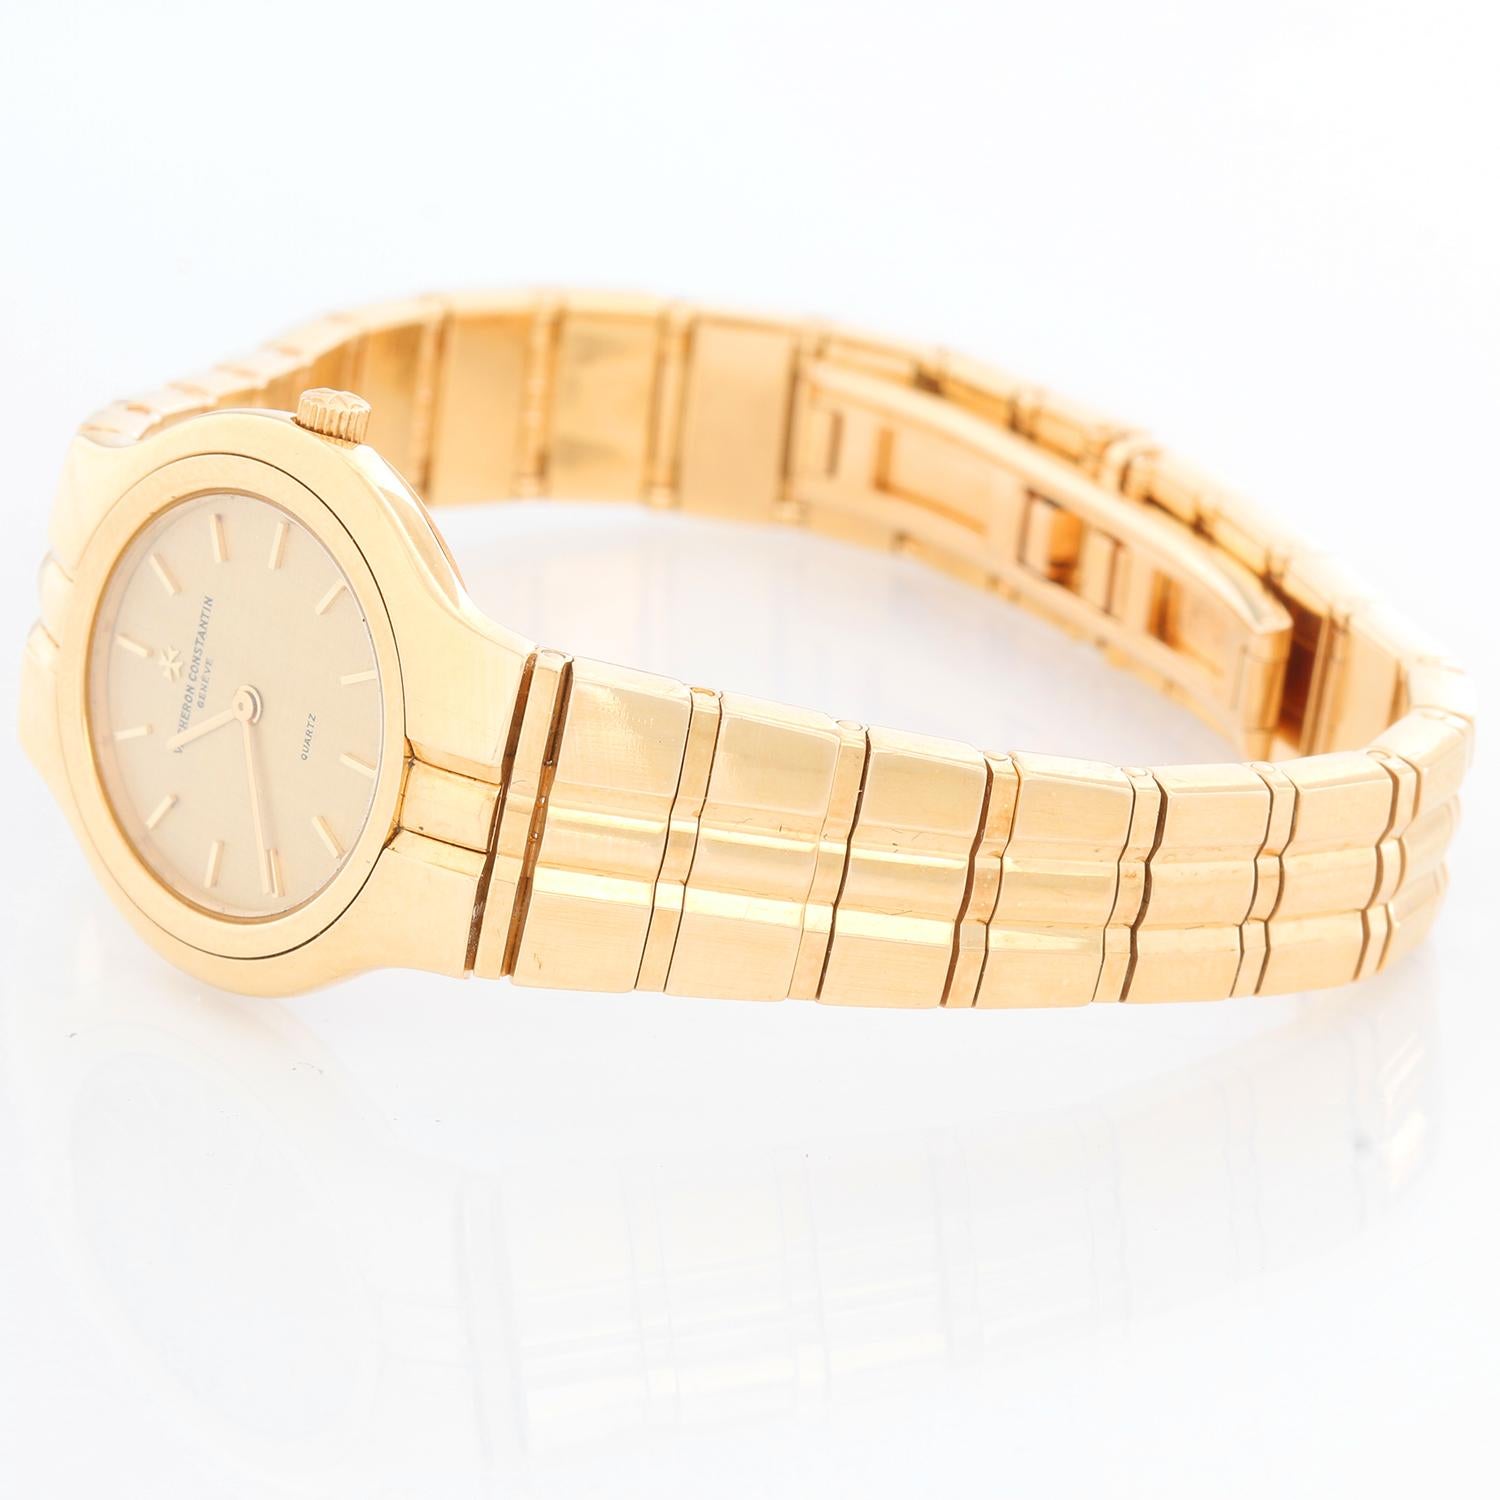 Vacheron Constantin 18K Yellow Gold Phidas Ladies Watch  - Quartz. 18K Yellow gold with smooth bezel ( 24 mm) . Champagne textured dial with stick hour markers . 18K Yellow gold link bracelet; will fit a 6.25 inch wrist . Pre-owned with custom box .